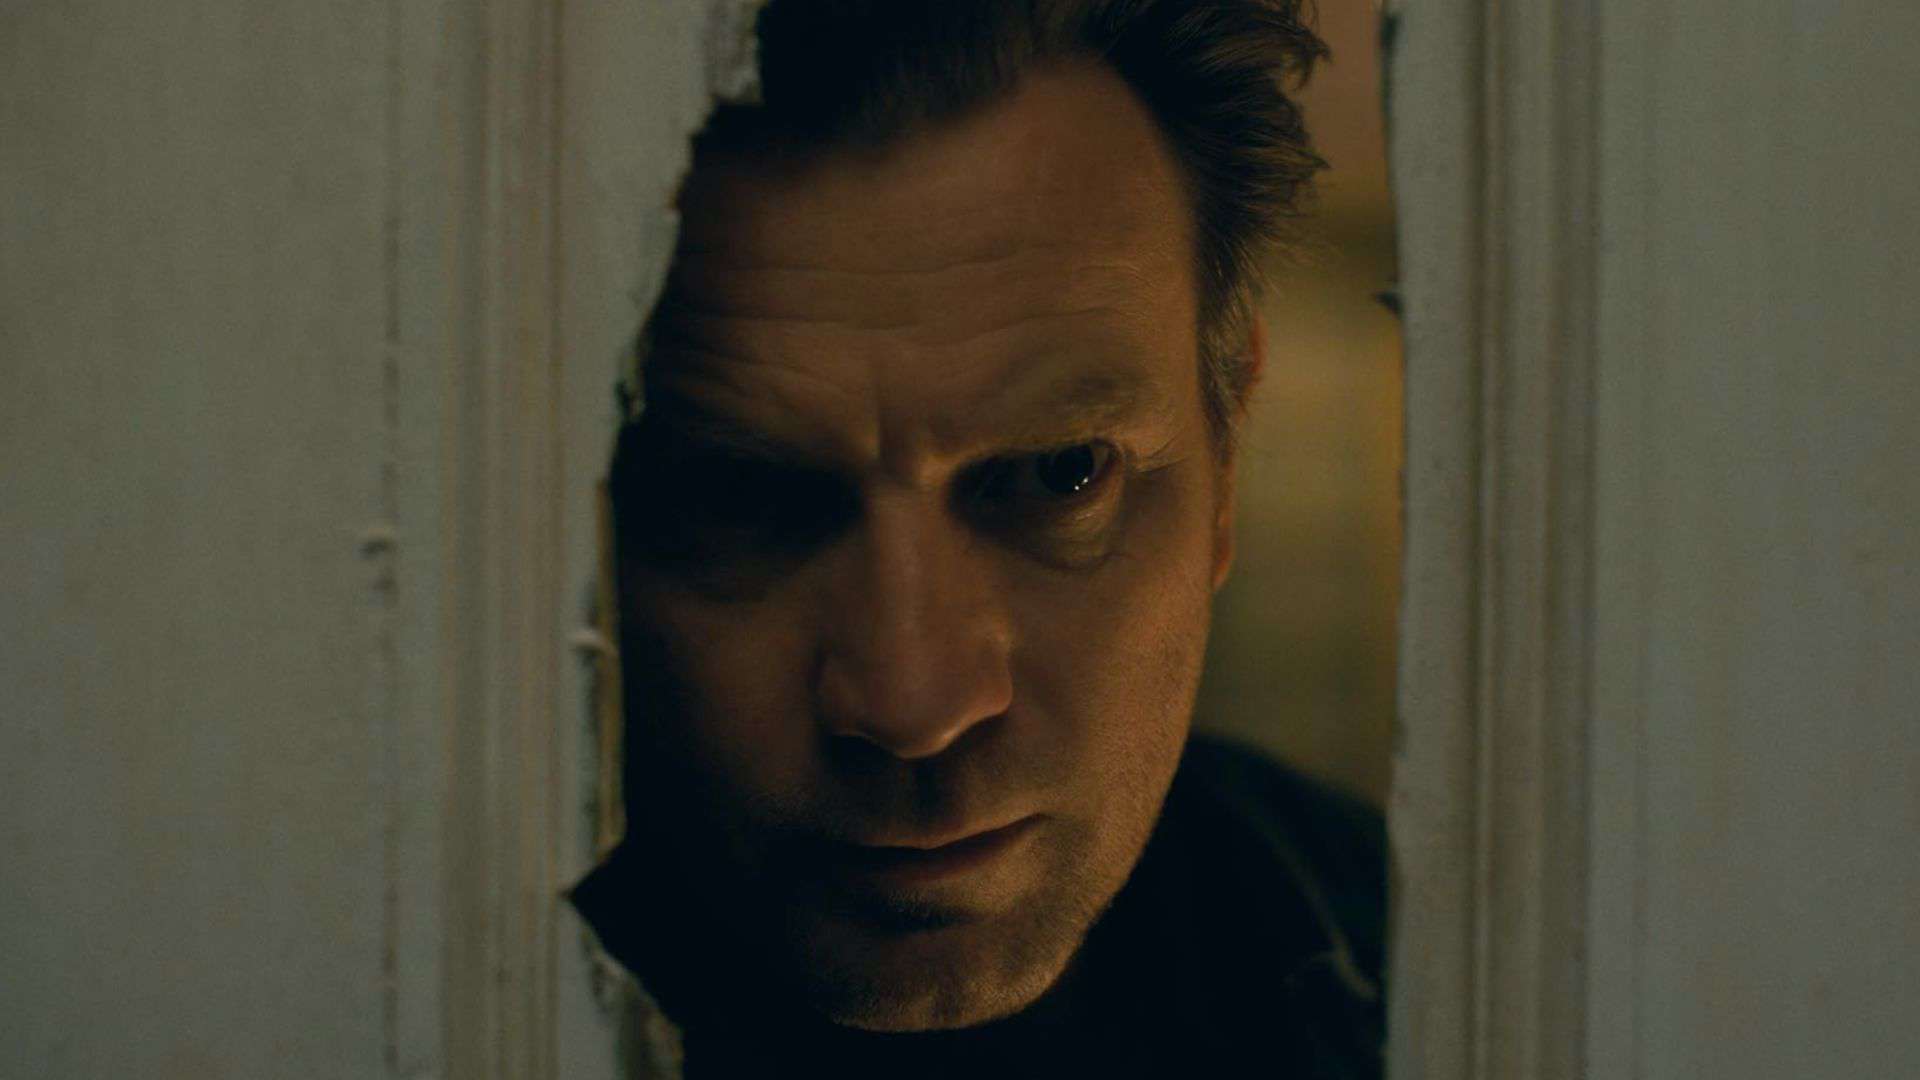 A man looks through a hole in a destroyed door in this image from Warner Bros. Pictures